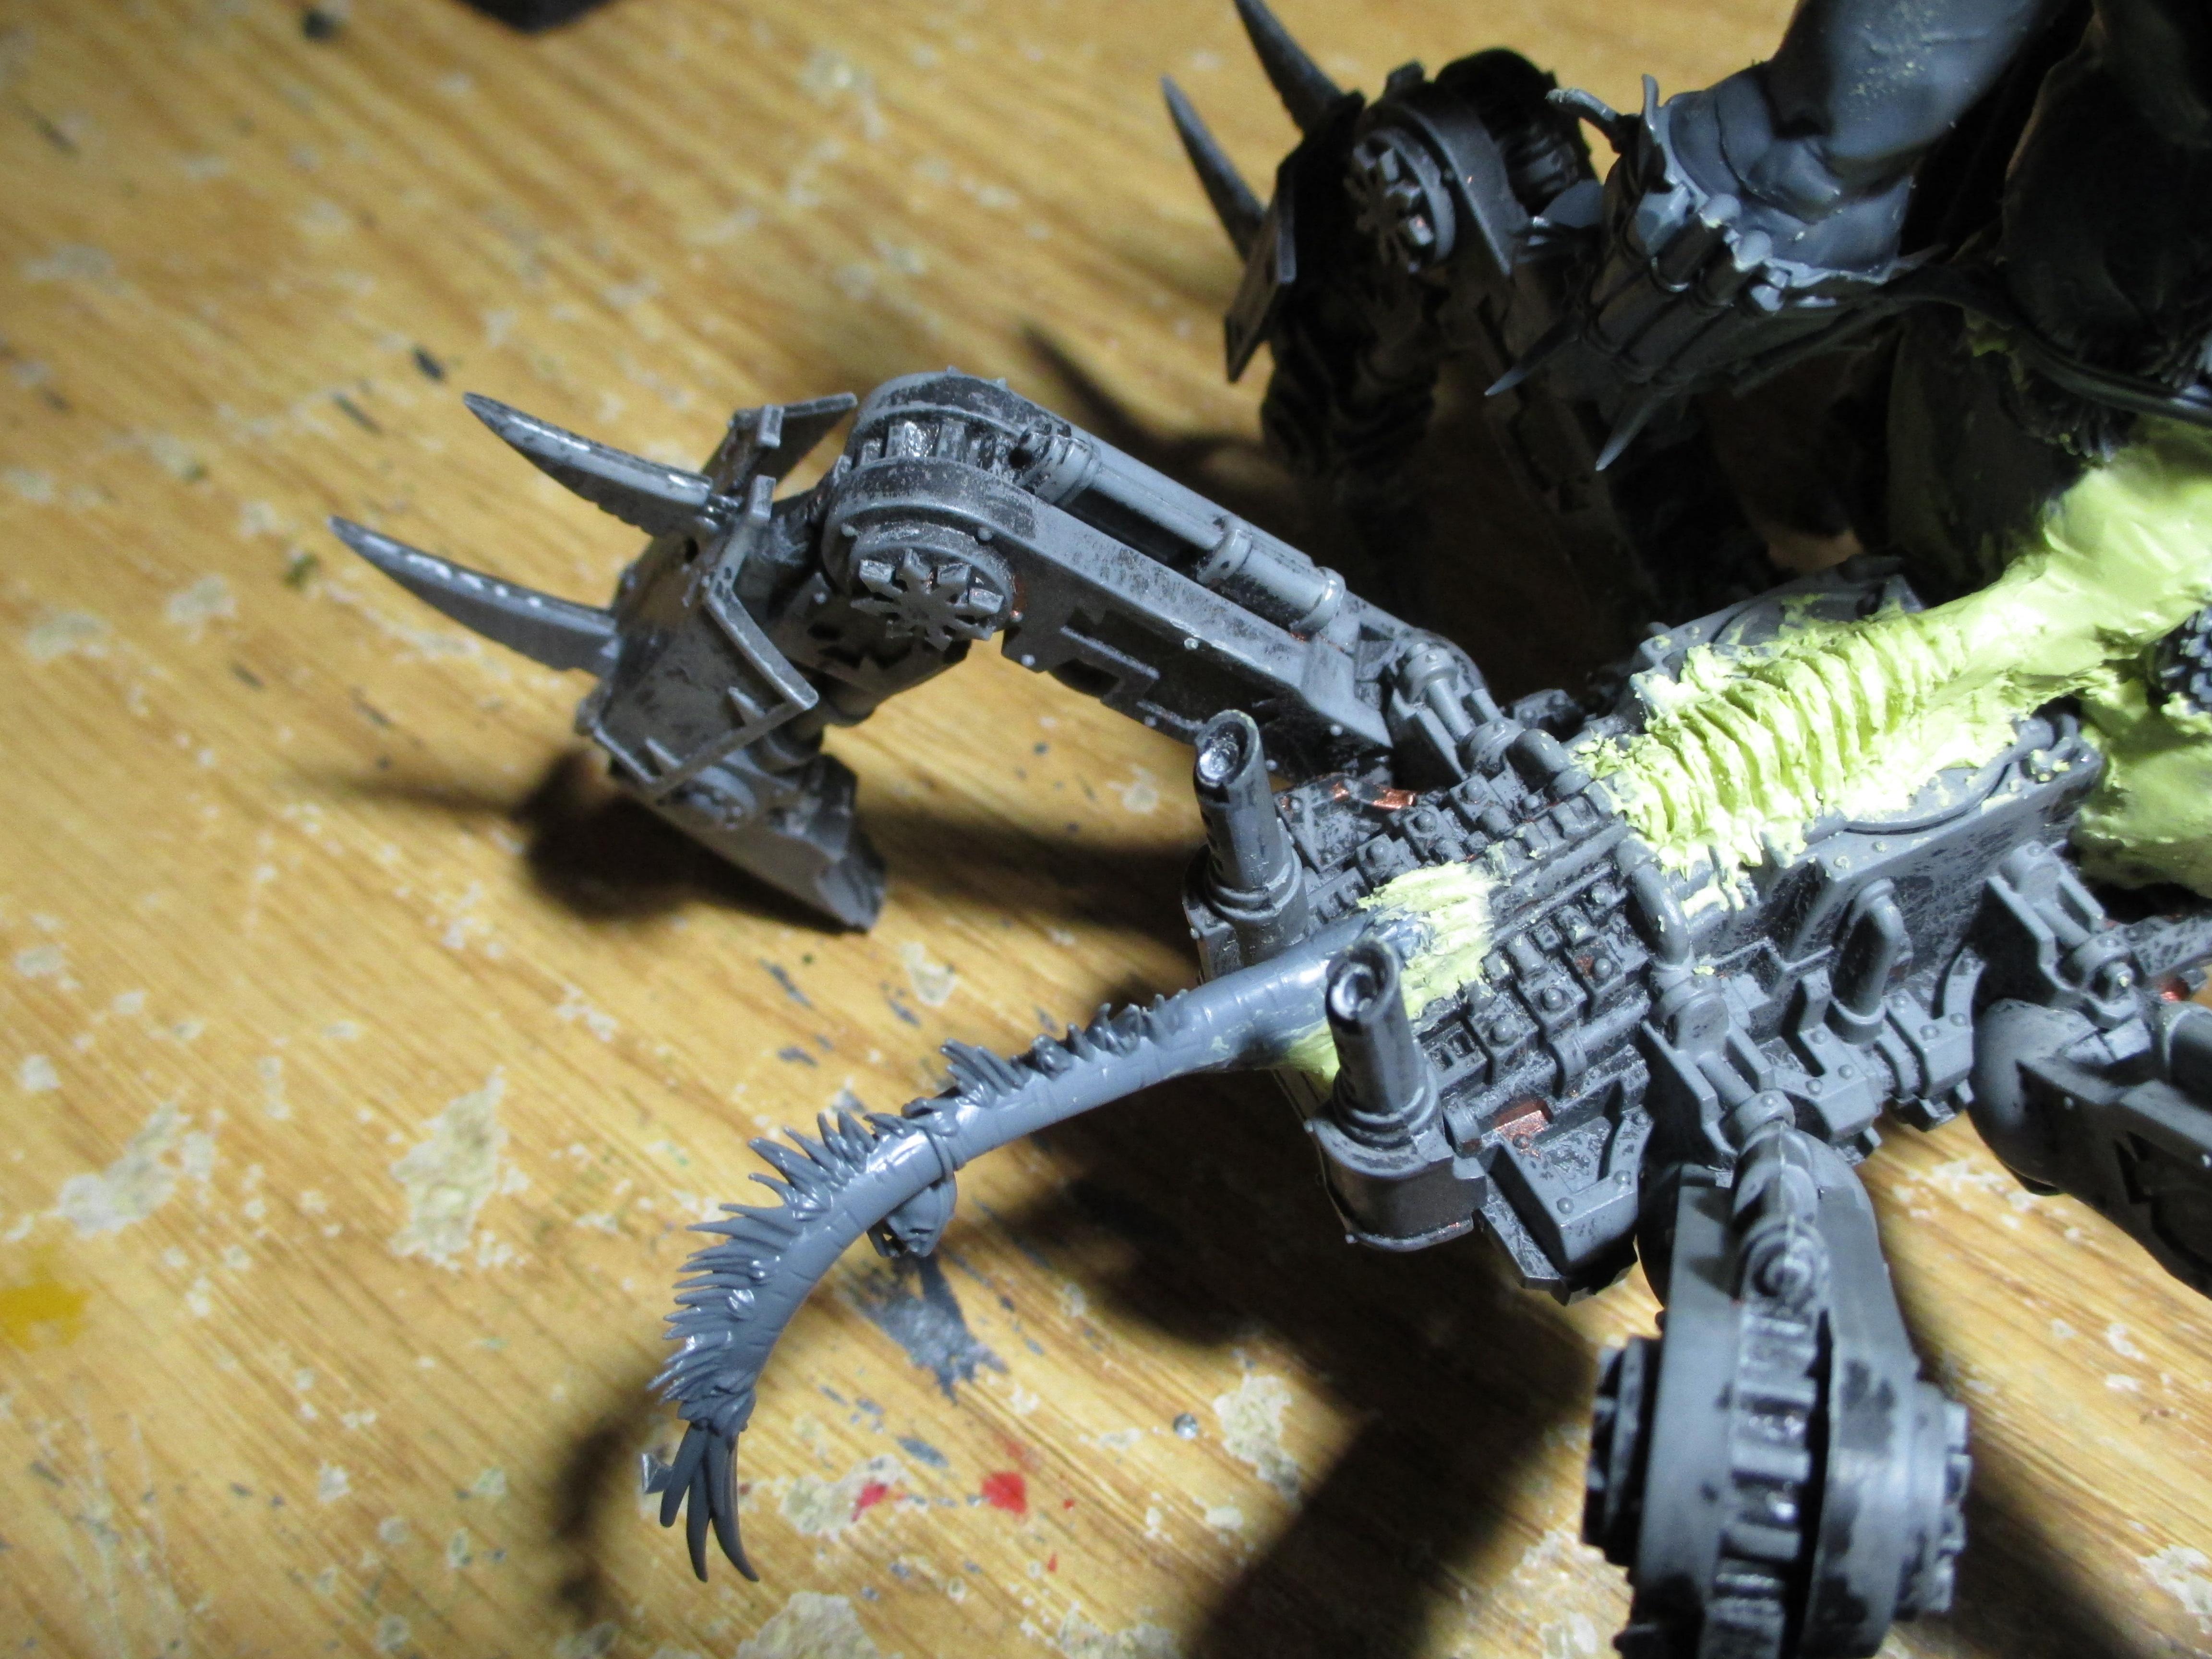 Airbrush, Cd, Chaos, Conversion, Soul Grinder, Work In Progress